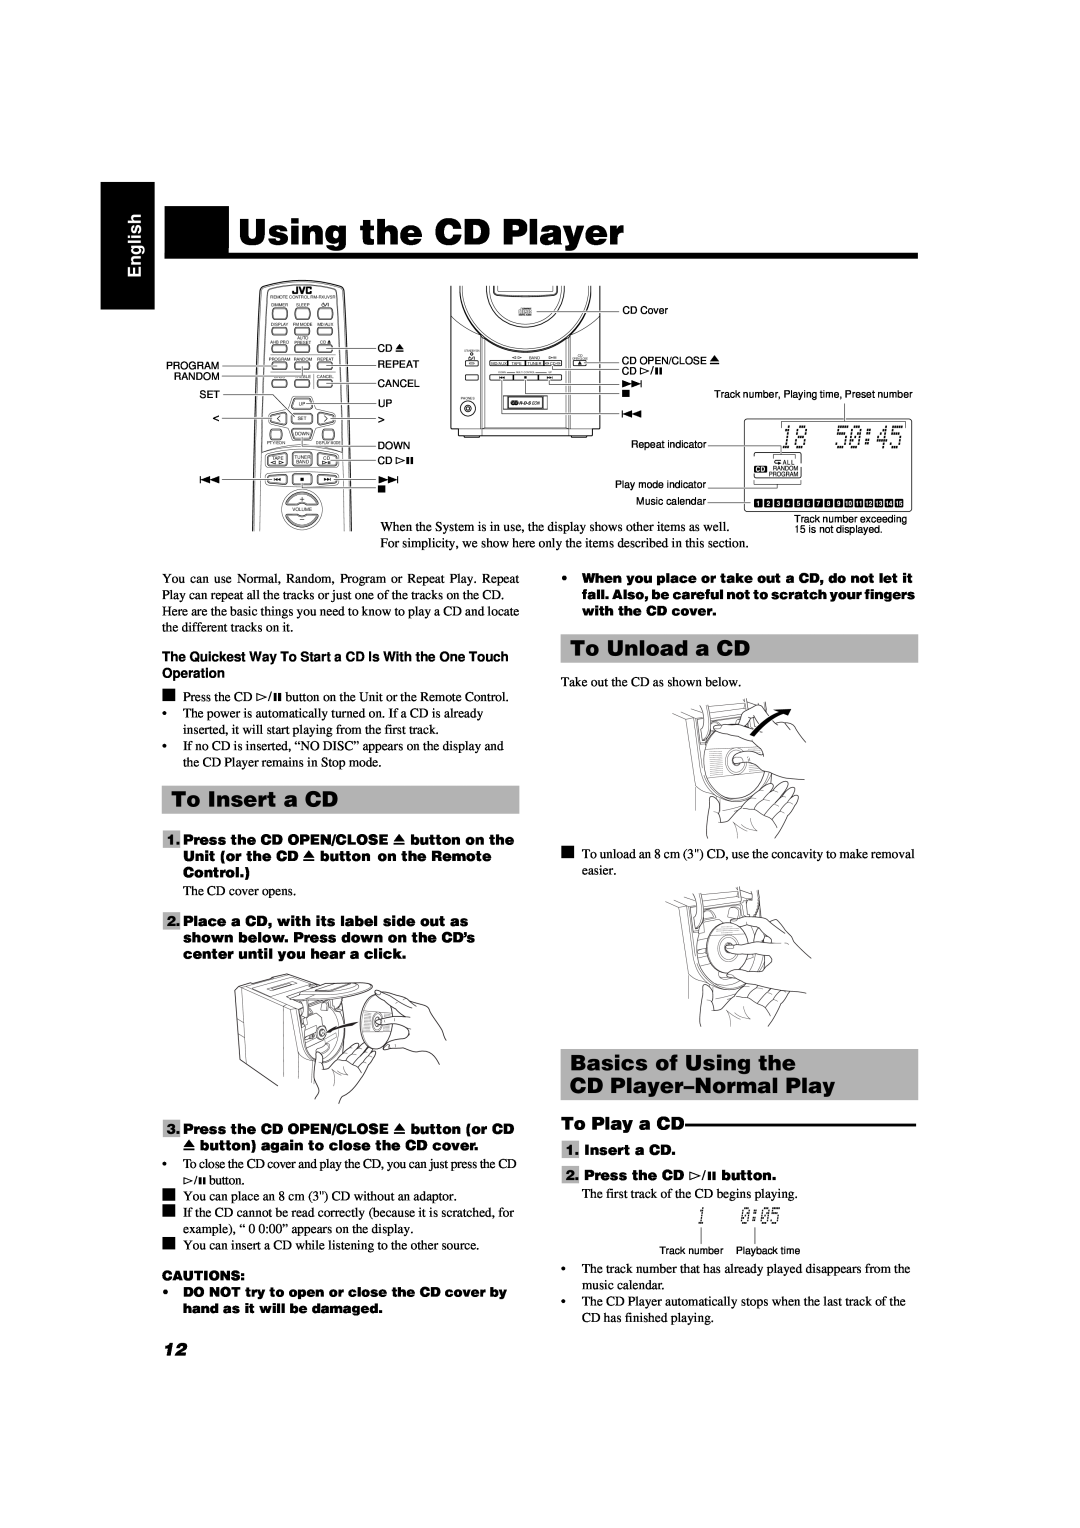 JVC UX-V55R manual To Insert a CD, To Unload a CD, Basics of Using the CD Player-NormalPlay, To Play a CD, Control 